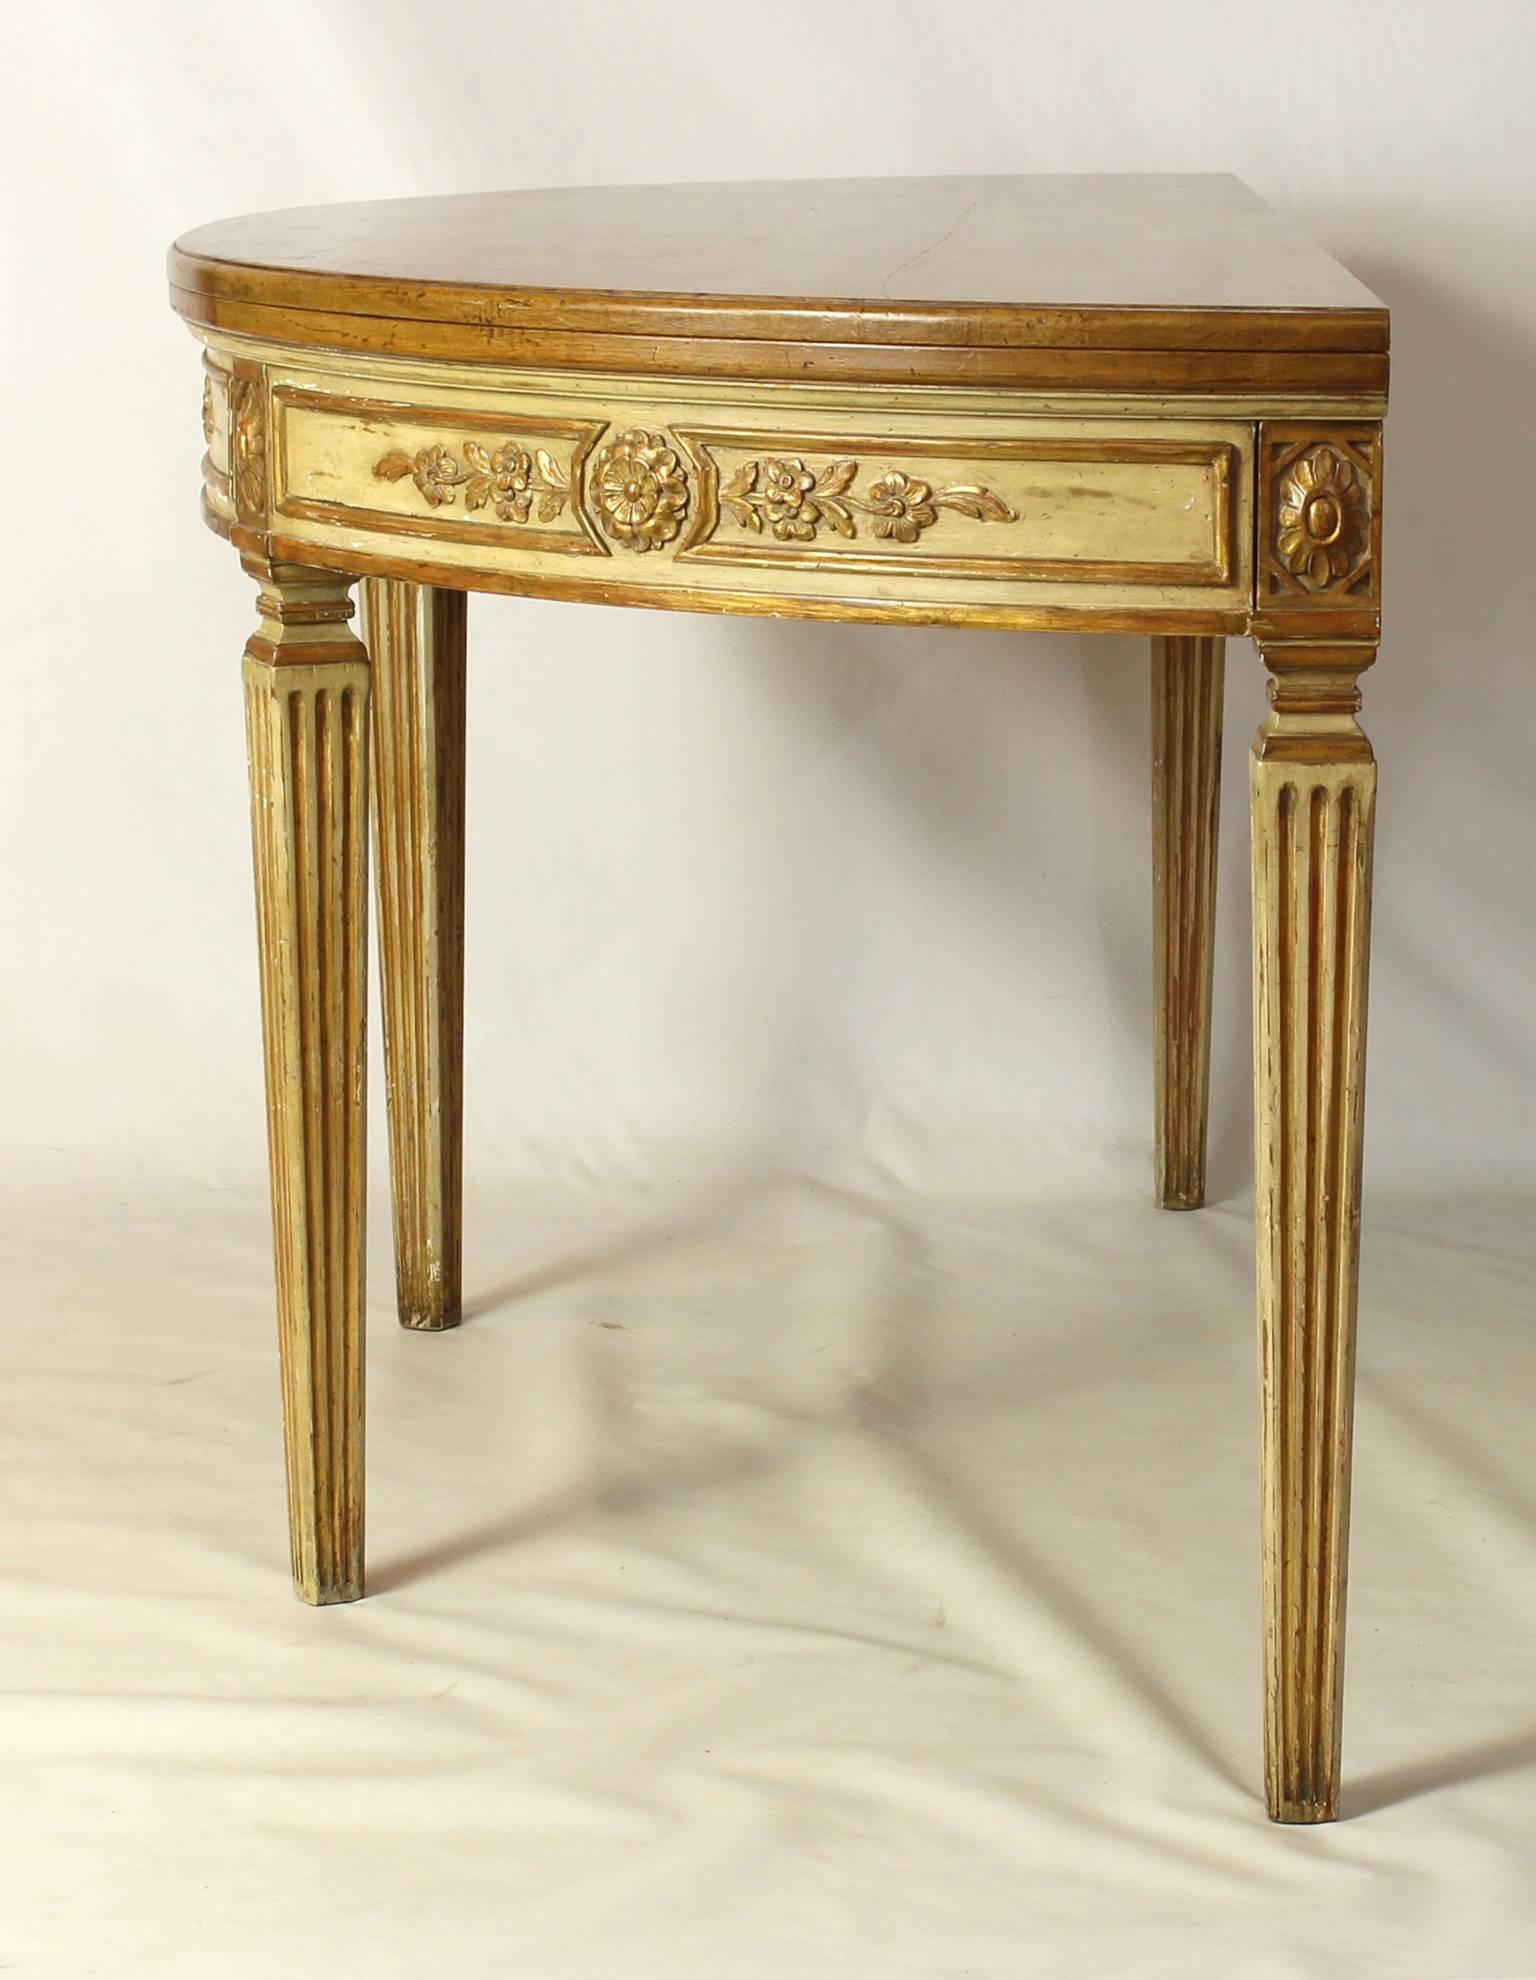 American Custom-Made Neoclassical Style Demilune Fold-Over Console Table